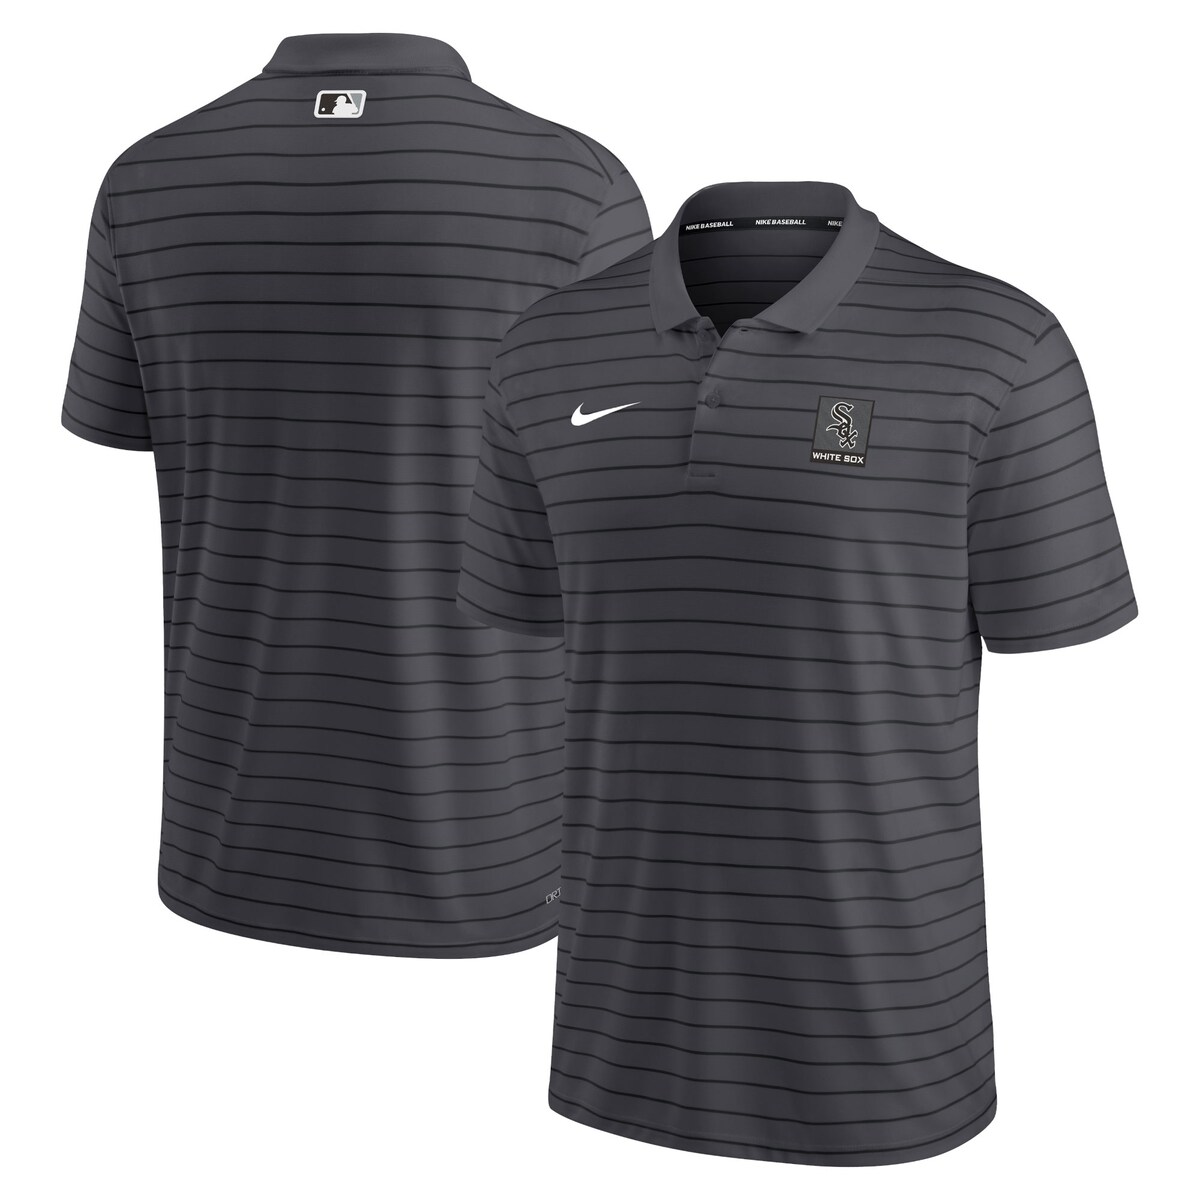 MLB zCg\bNX |Vc Nike iCL Y AXTCg (Men's Nike Authentic Collection Short Sleeve Striped Polo)